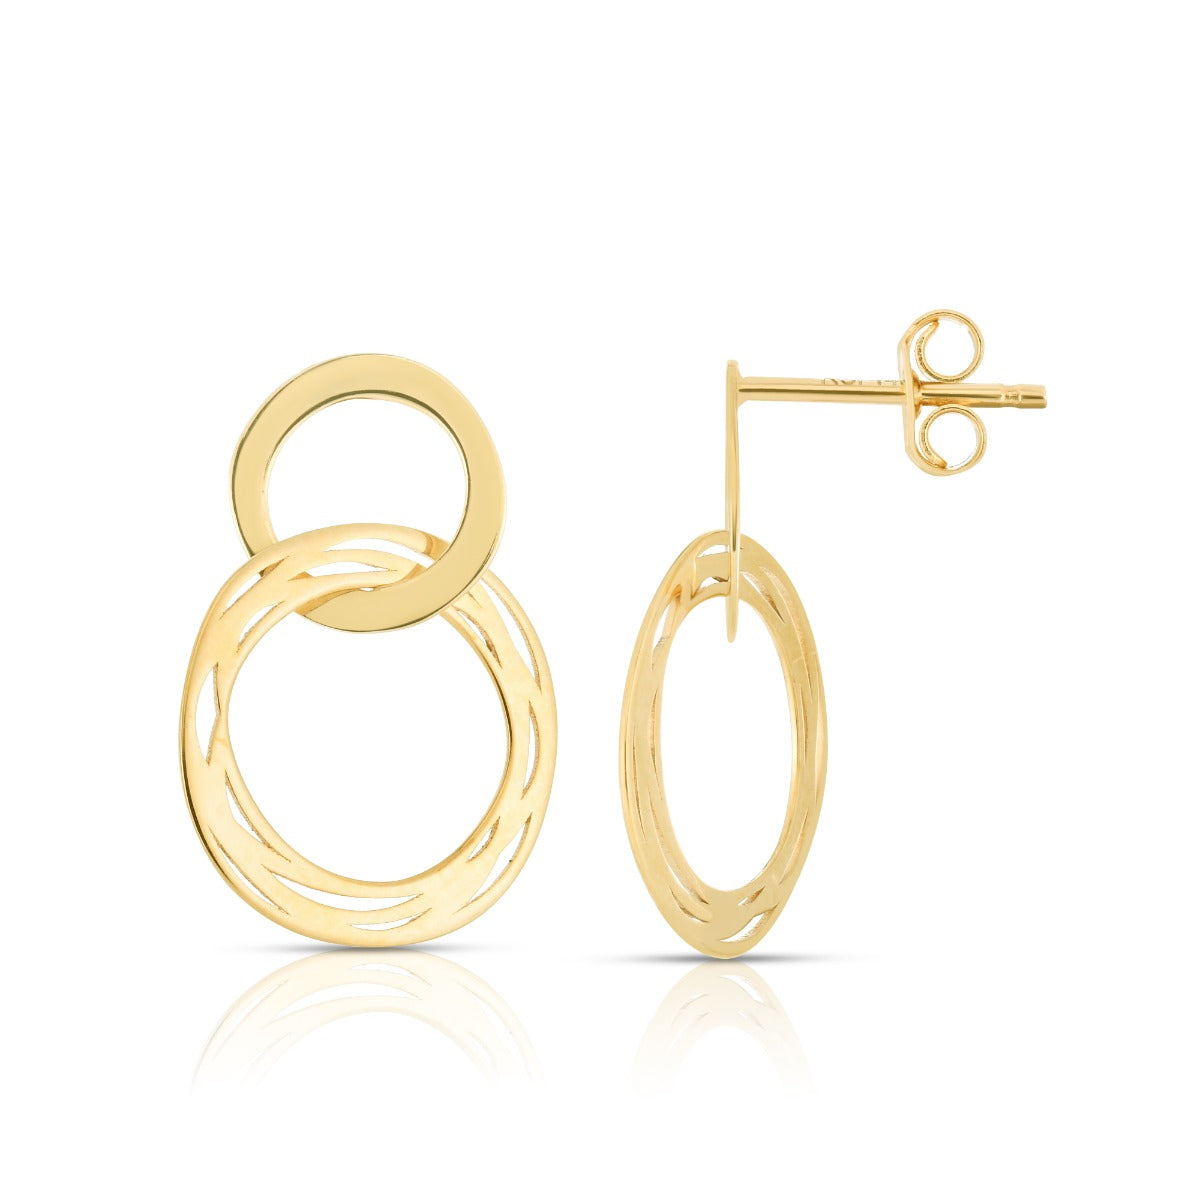 14K Gold Polished Double Circle Cutout Earrings with Push Back Clasp